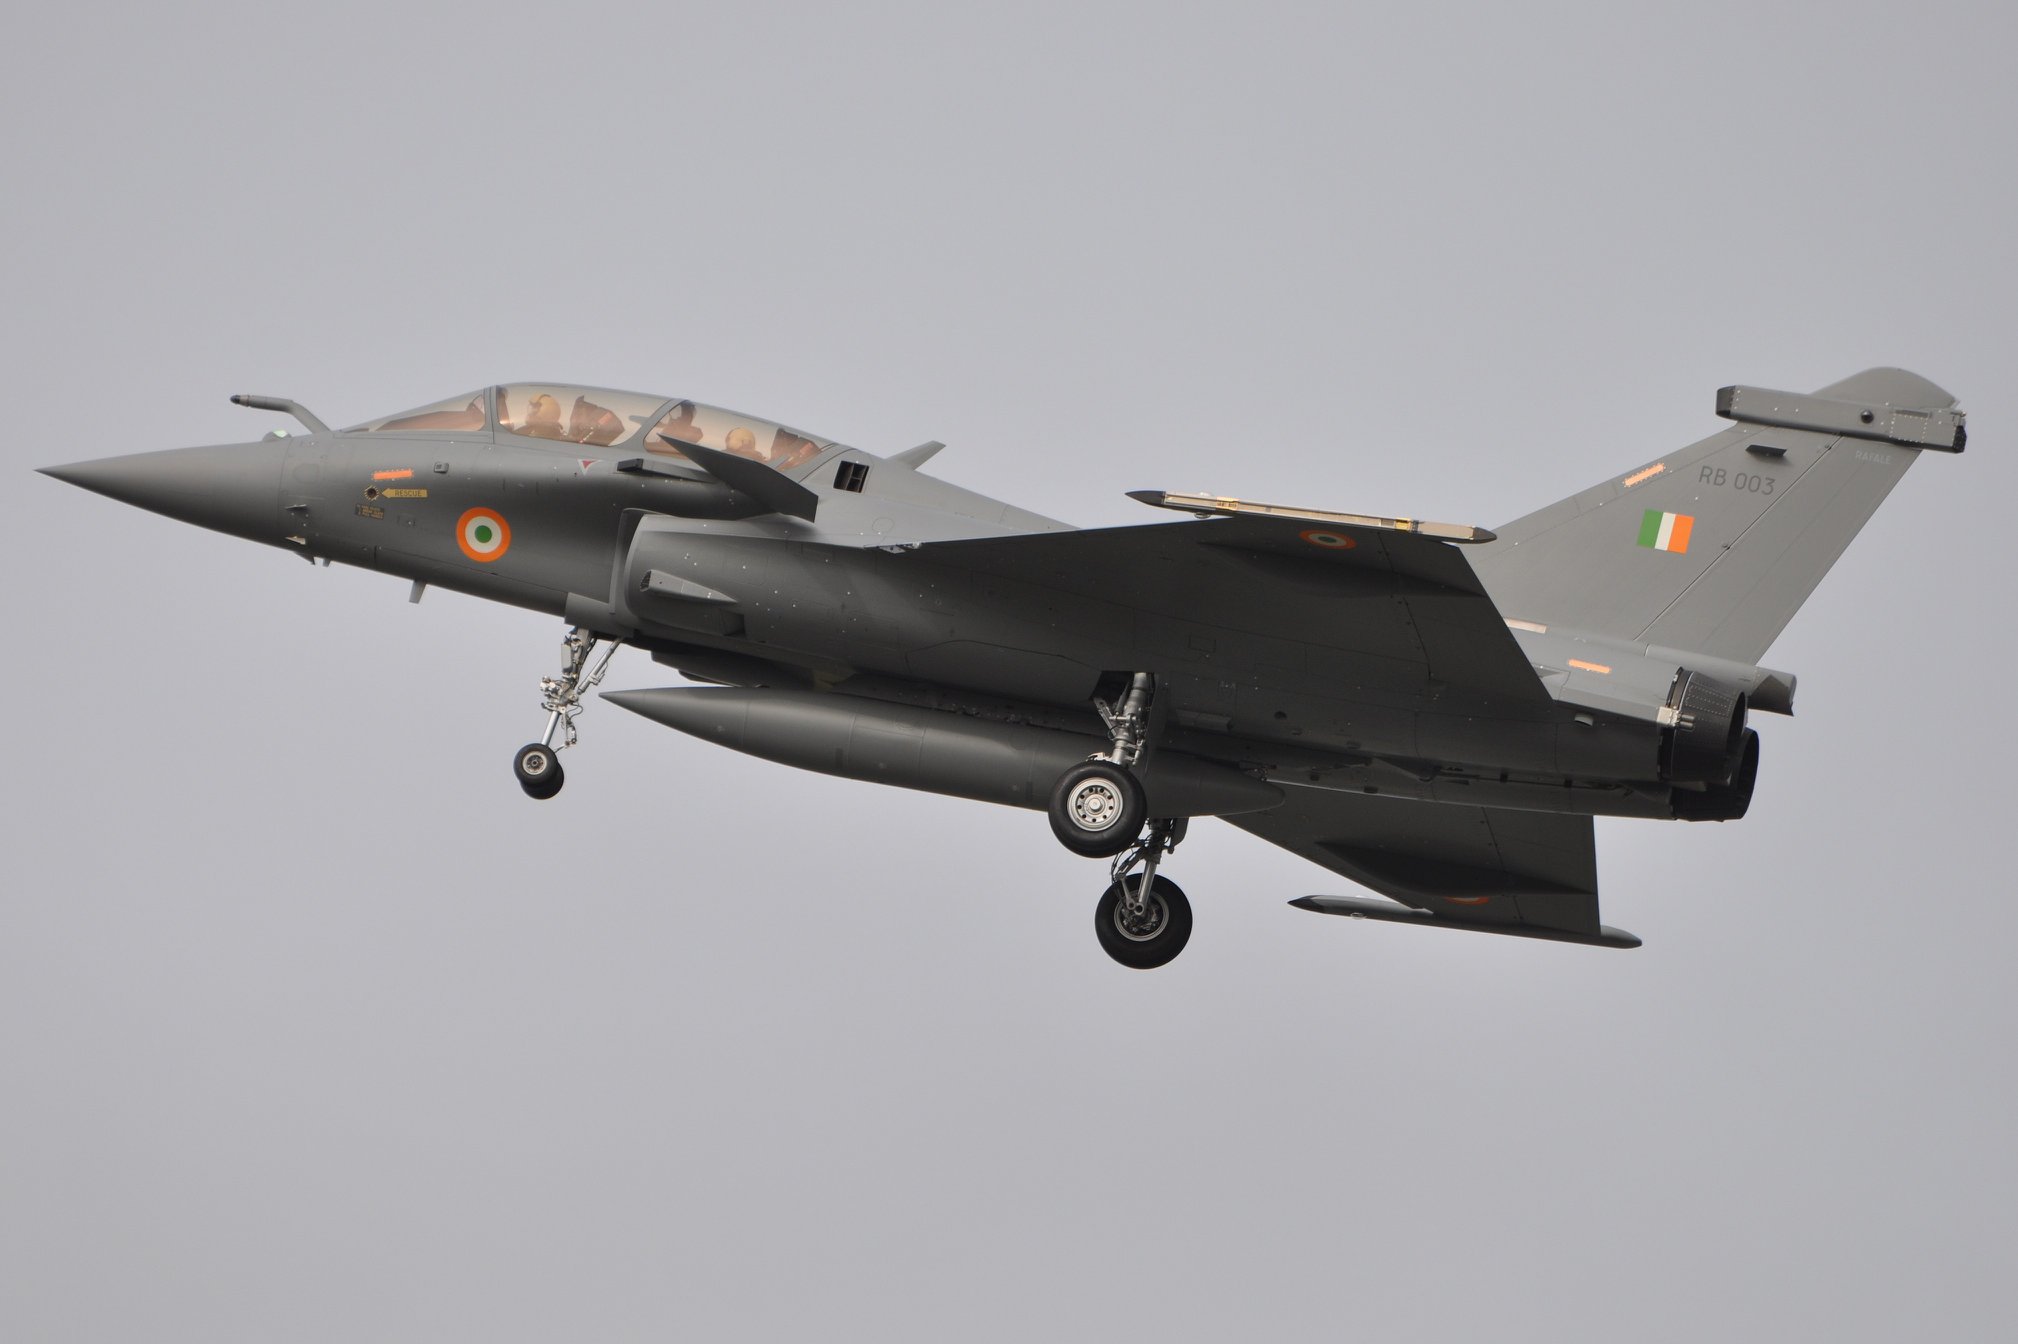 Rafale Indian Air Force